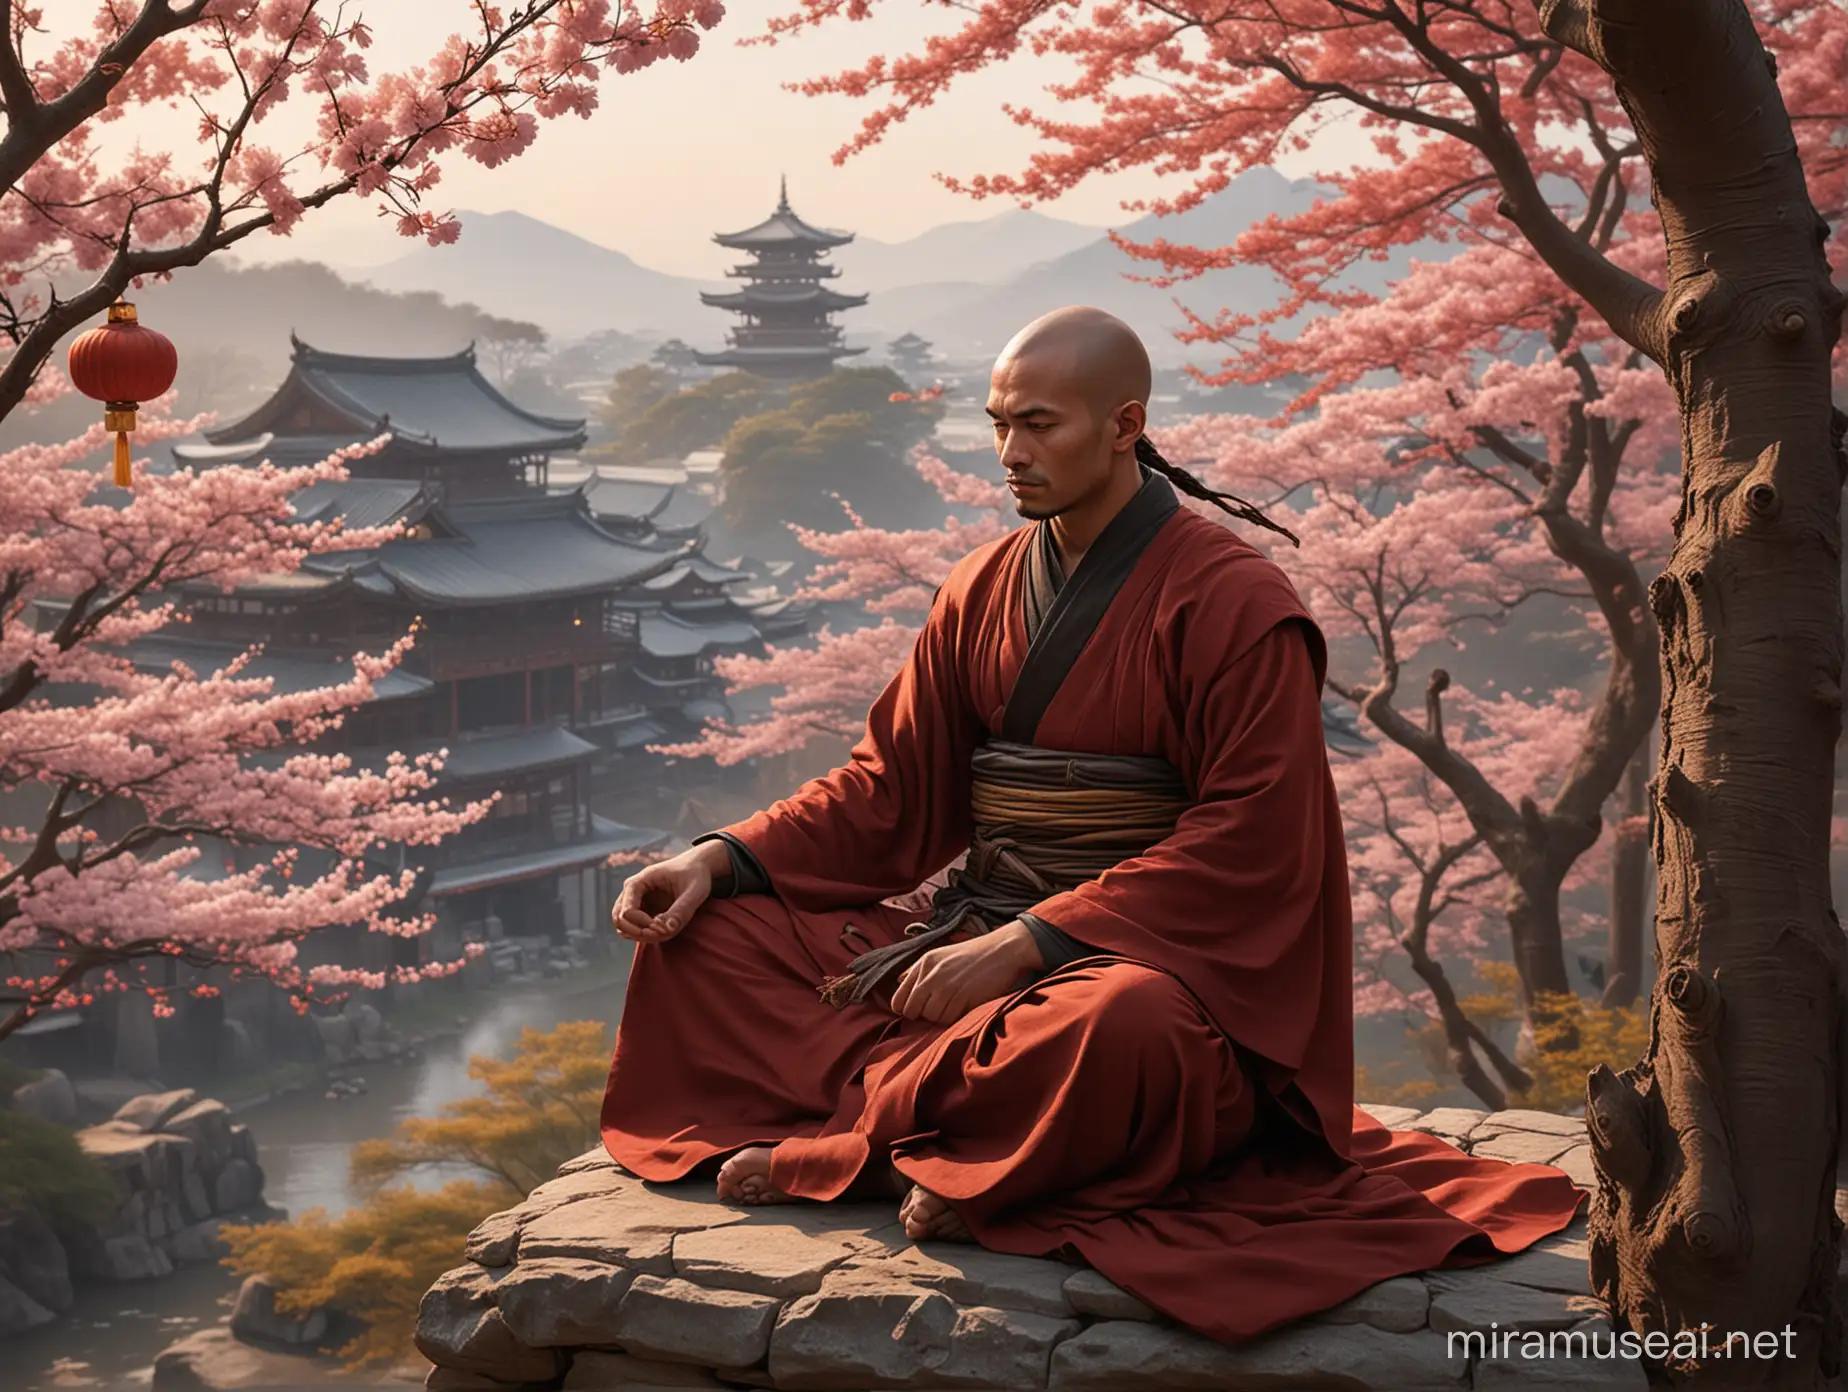 Style: realistic concept art, video game artwork, Legends of the Five Rings RPG 
Appearance: A monk of the Scorpion Clan, distinguished by his clean-shaven face and a shaven head, save for a long braided tail or topknot, symbolizing his commitment to his monkhood. He wears robes primarily in shades of red and brown, a Scorpion emblem proudly displayed on the shoulder of his sleeve. Rather than wearing a mask conventionally, he carries it as a necklace, hanging gracefully around his neck and resting against his chest.
Pose: He is depicted in a serene state of meditation, sitting with perfect posture upon a cushion, his hands gently resting on his knees in the traditional mudra of meditation. His expression is serene, his mind focused inward, as he seeks enlightenment through introspection and discipline.
Companion: By his side is a sleek black raven, his loyal companion and confidant. The raven is perched on a nearby branch or ledge. 
Background: In the distance, the silhouette of a Japanese-style monastery or temple emerges against the horizon, its graceful architecture blending harmoniously with the surrounding natural landscape. Cherry blossom trees frame the scene, their delicate petals drifting gently on the breeze, while lanterns cast a warm glow upon the tranquil setting. This temple serves as a sanctuary, a place of refuge where he seeks solace and enlightenment amidst the chaos of the world.